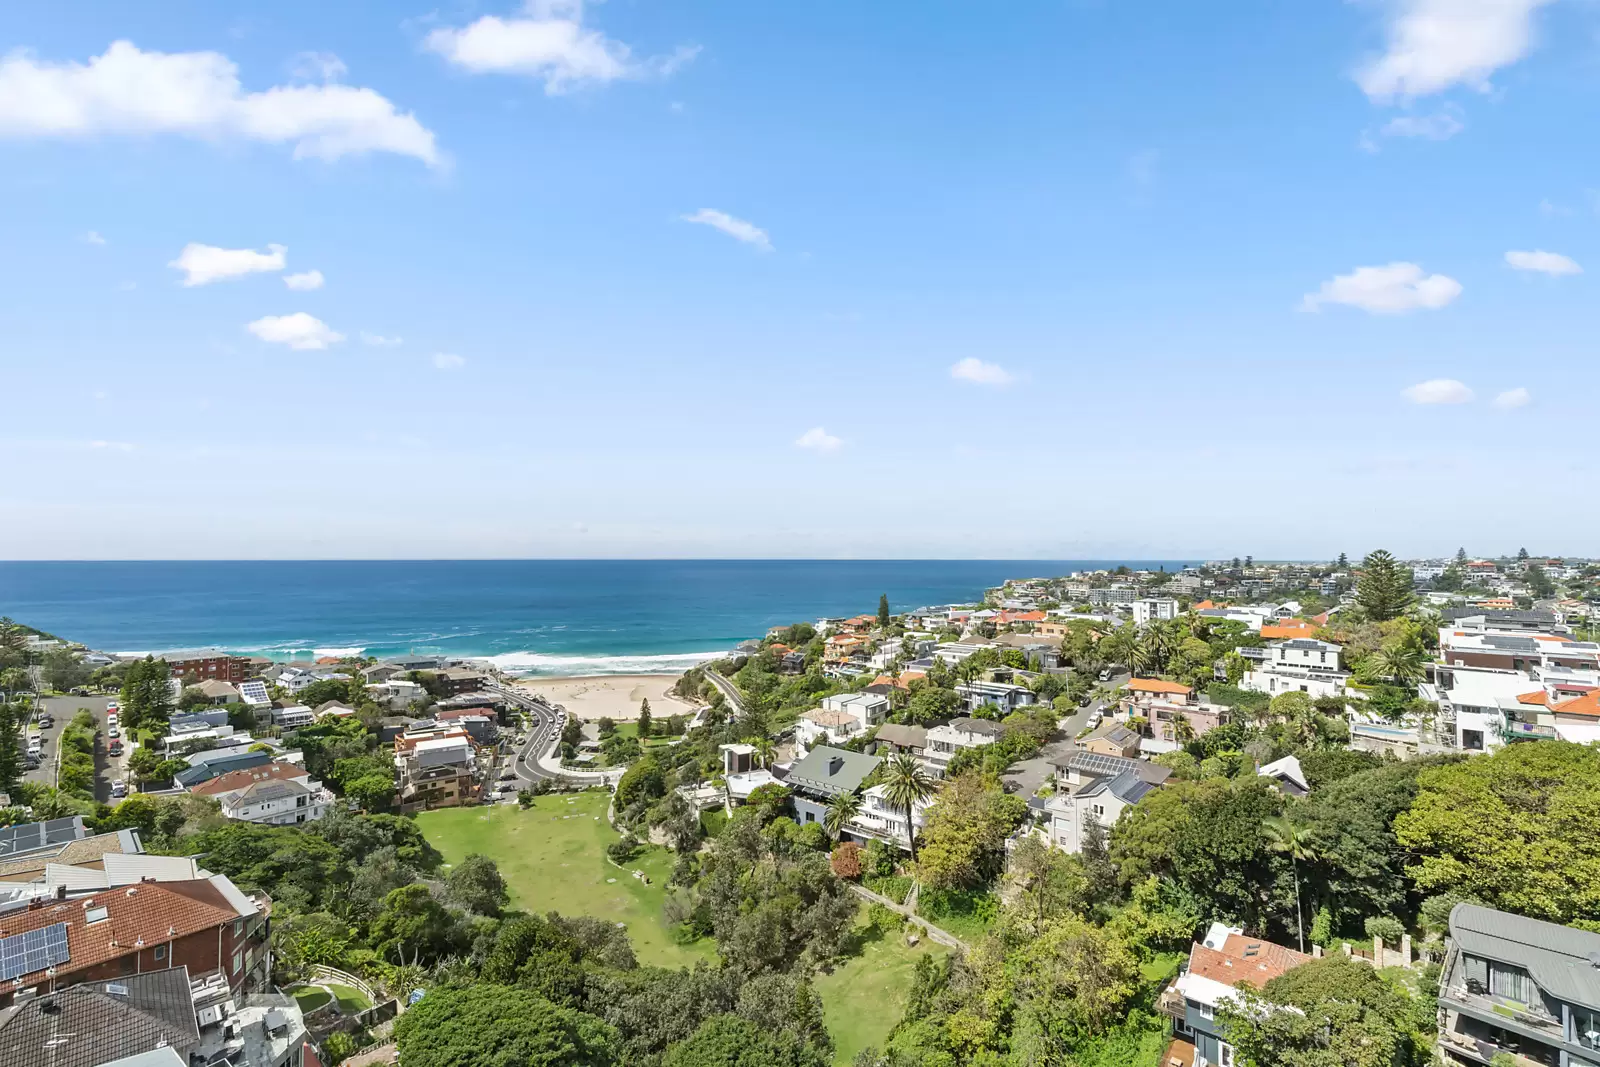 Penthouse 1 & 2 / Illawong Avenue, Tamarama For Sale by Sydney Sotheby's International Realty - image 23